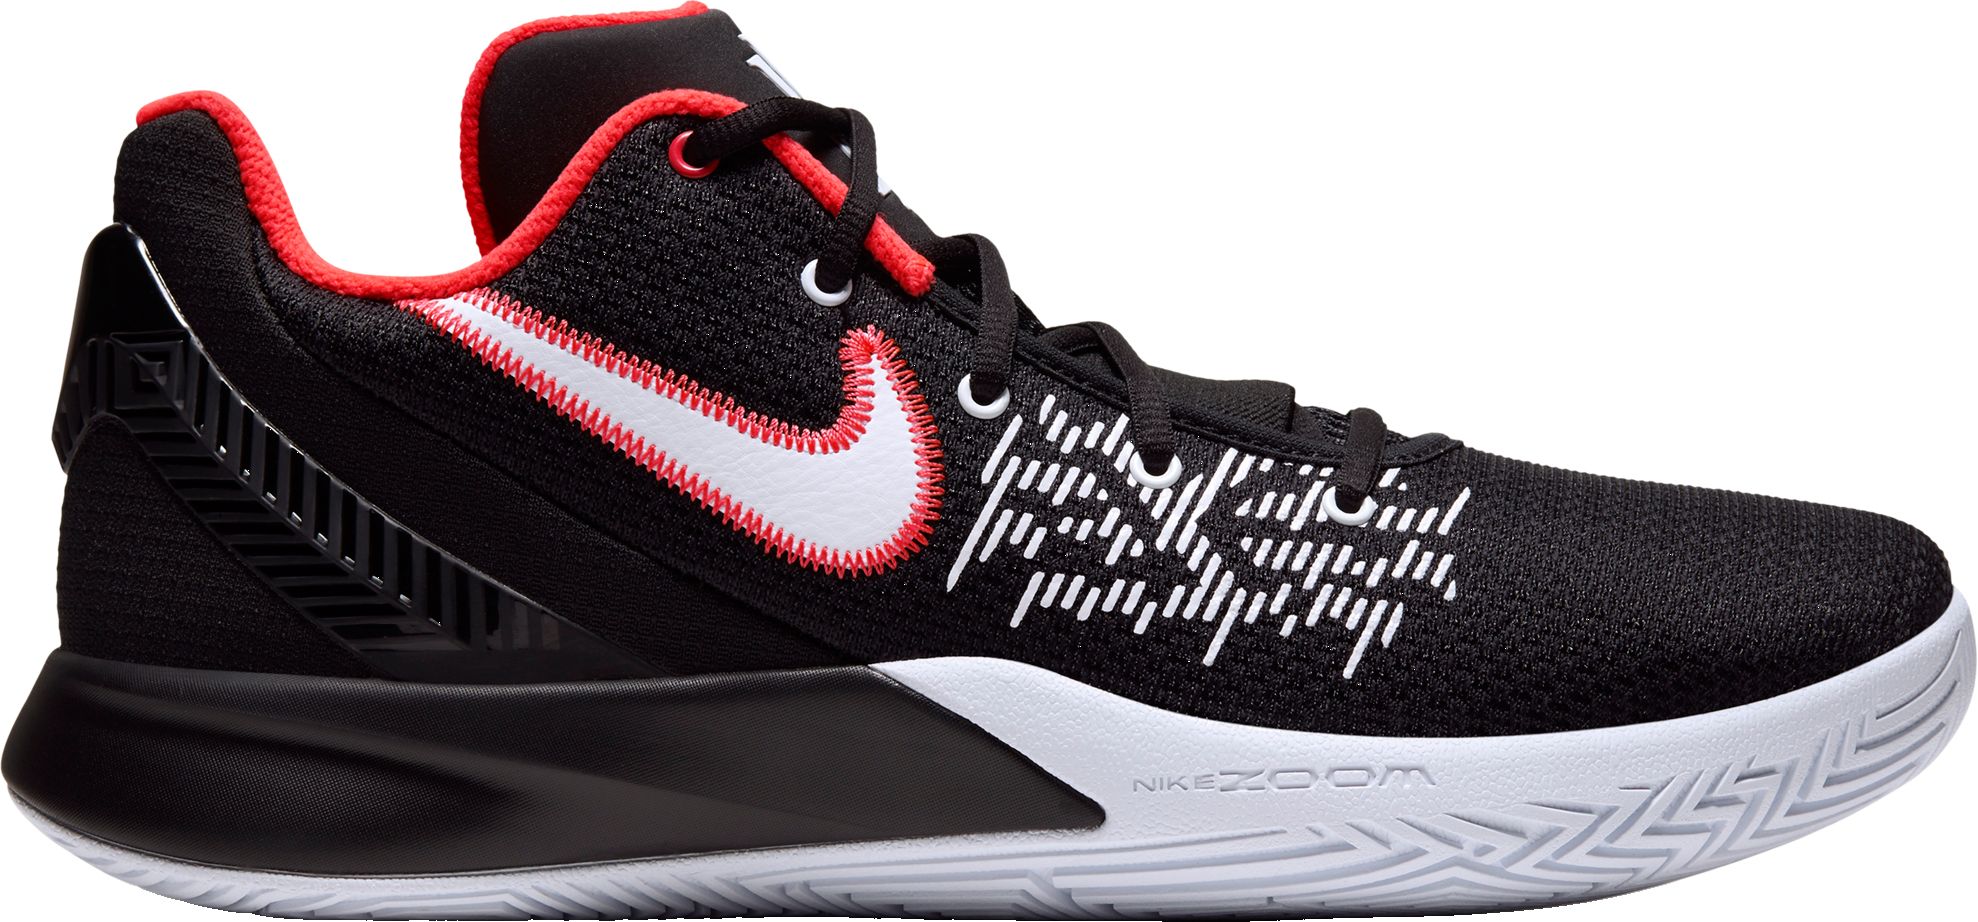 kyrie fly trap shoes